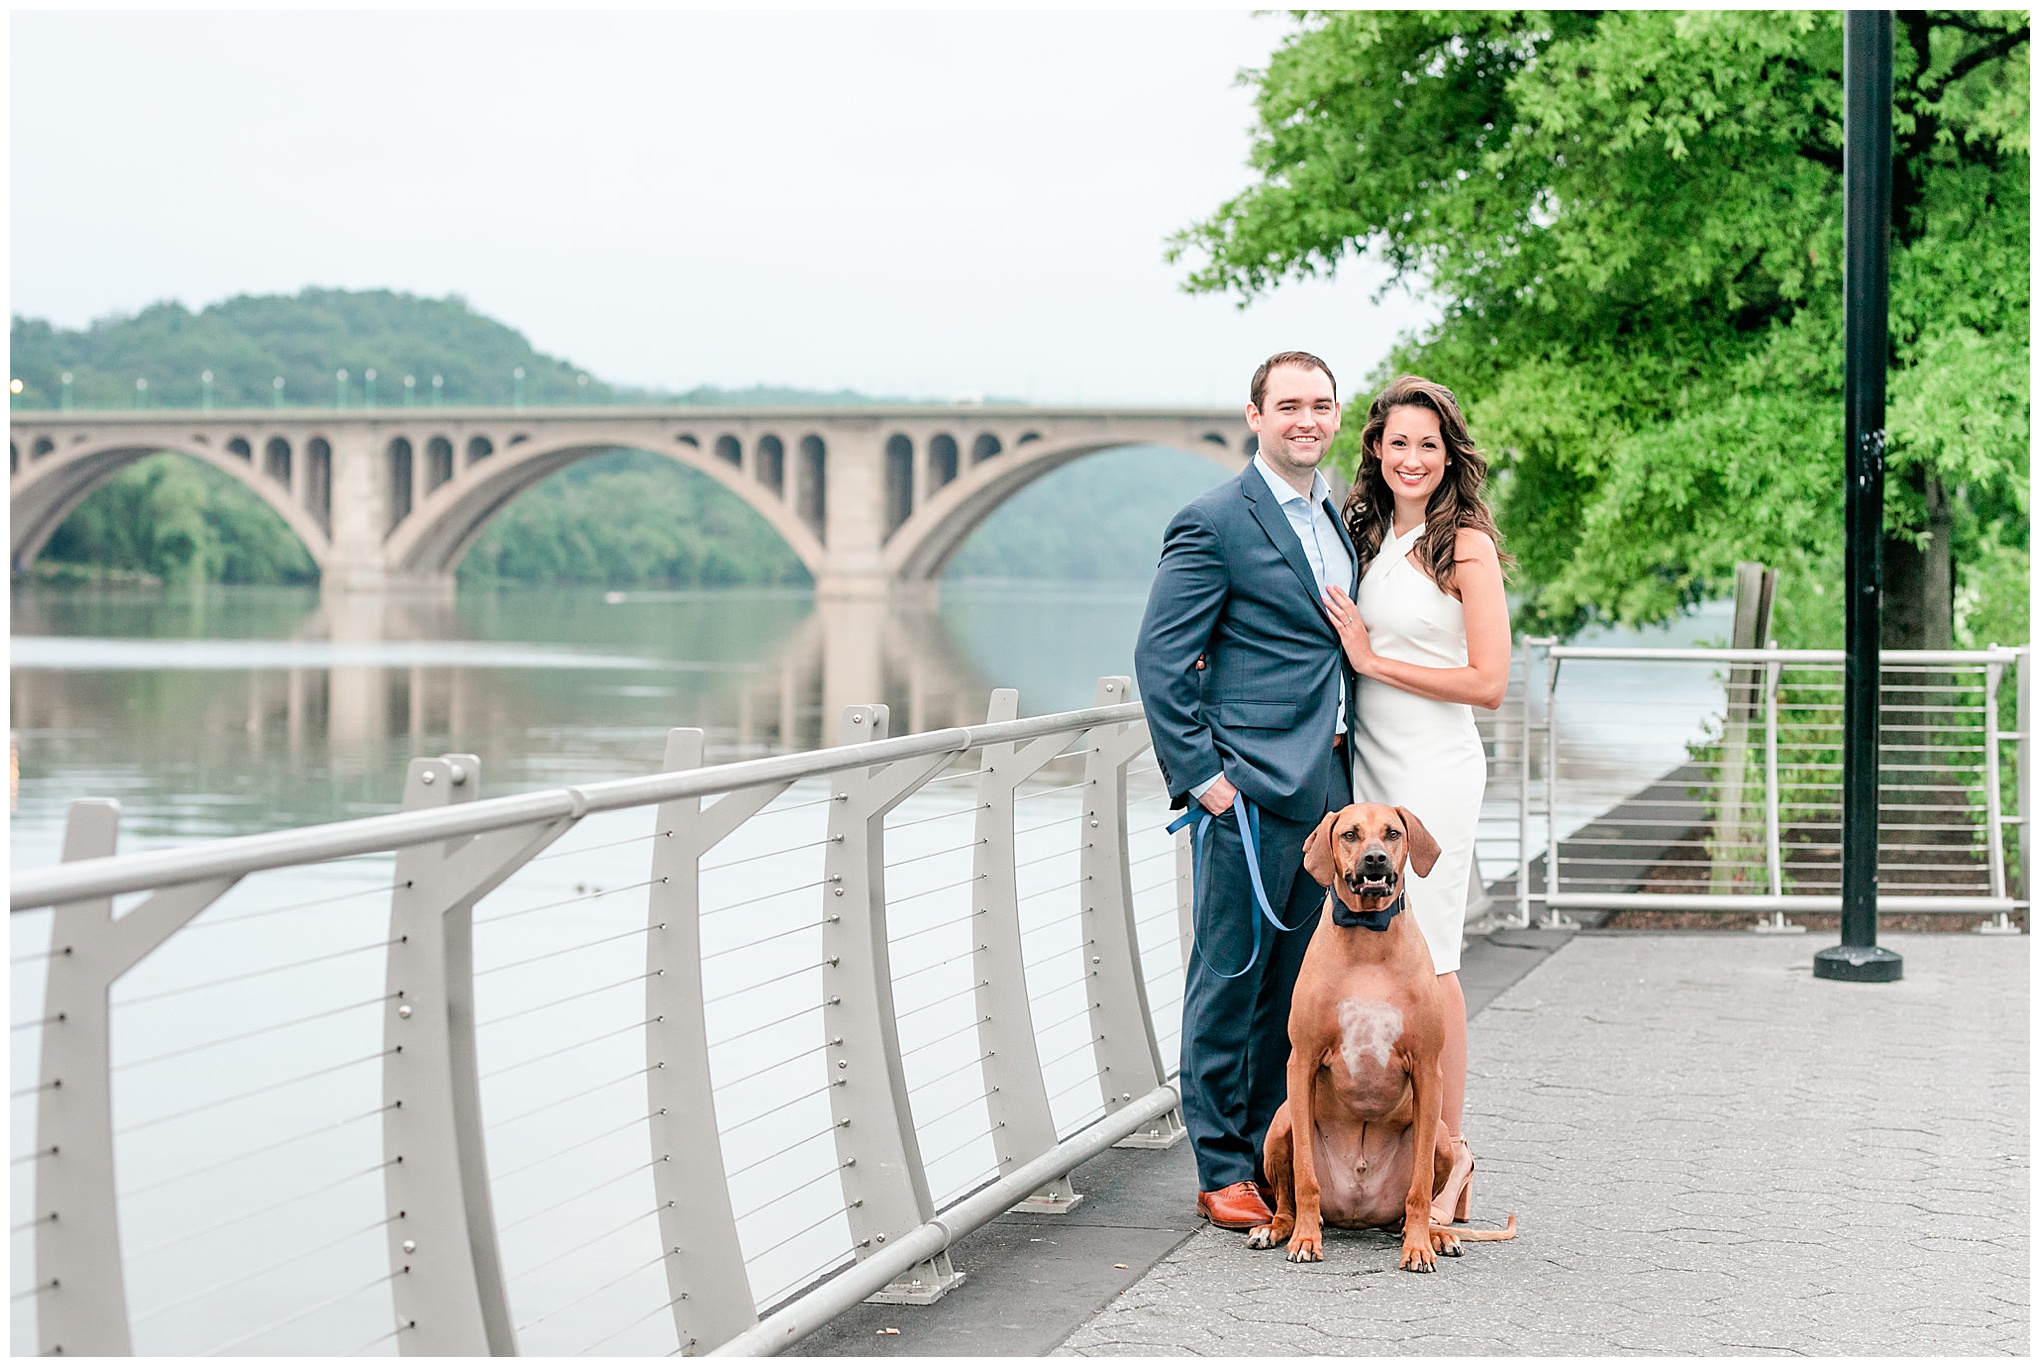 summer Georgetown engagement photos, DC engagement photos, classic engagement photos, summer engagement photos, summer engagement photo outfits, classic engagement photo outfits, Rachel E.H. Photography, DC wedding photographer, DC engagement photographer, DC proposal photographer, DC photographer, couple with dog